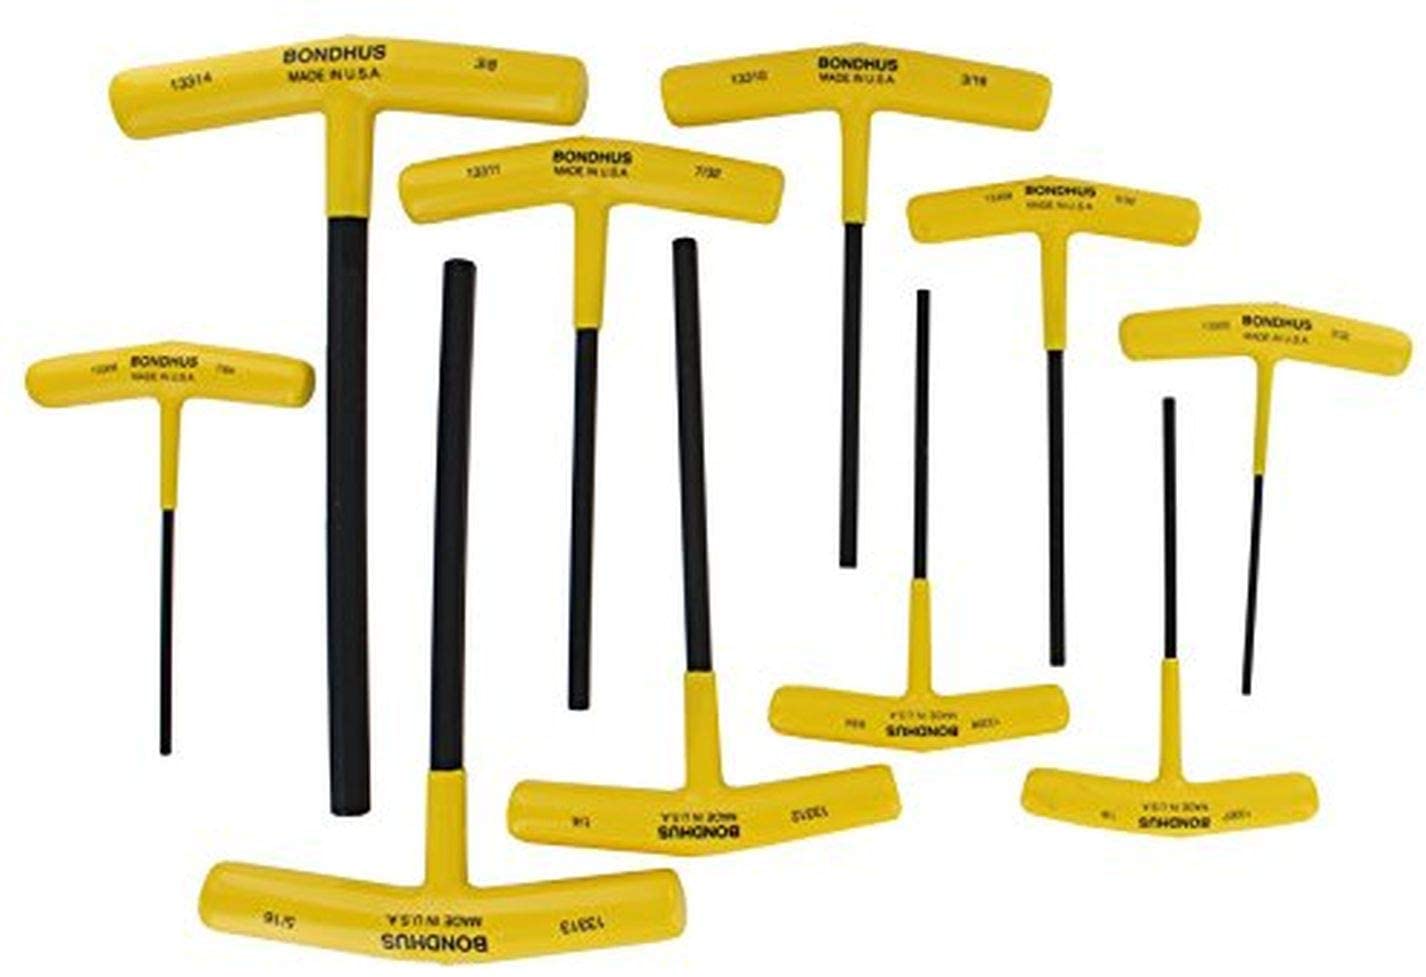 Bondhus 13390 Set of 10 Hex T-Handles with Stand. Sizes 3/32-3/8-Inch - MPR Tools & Equipment